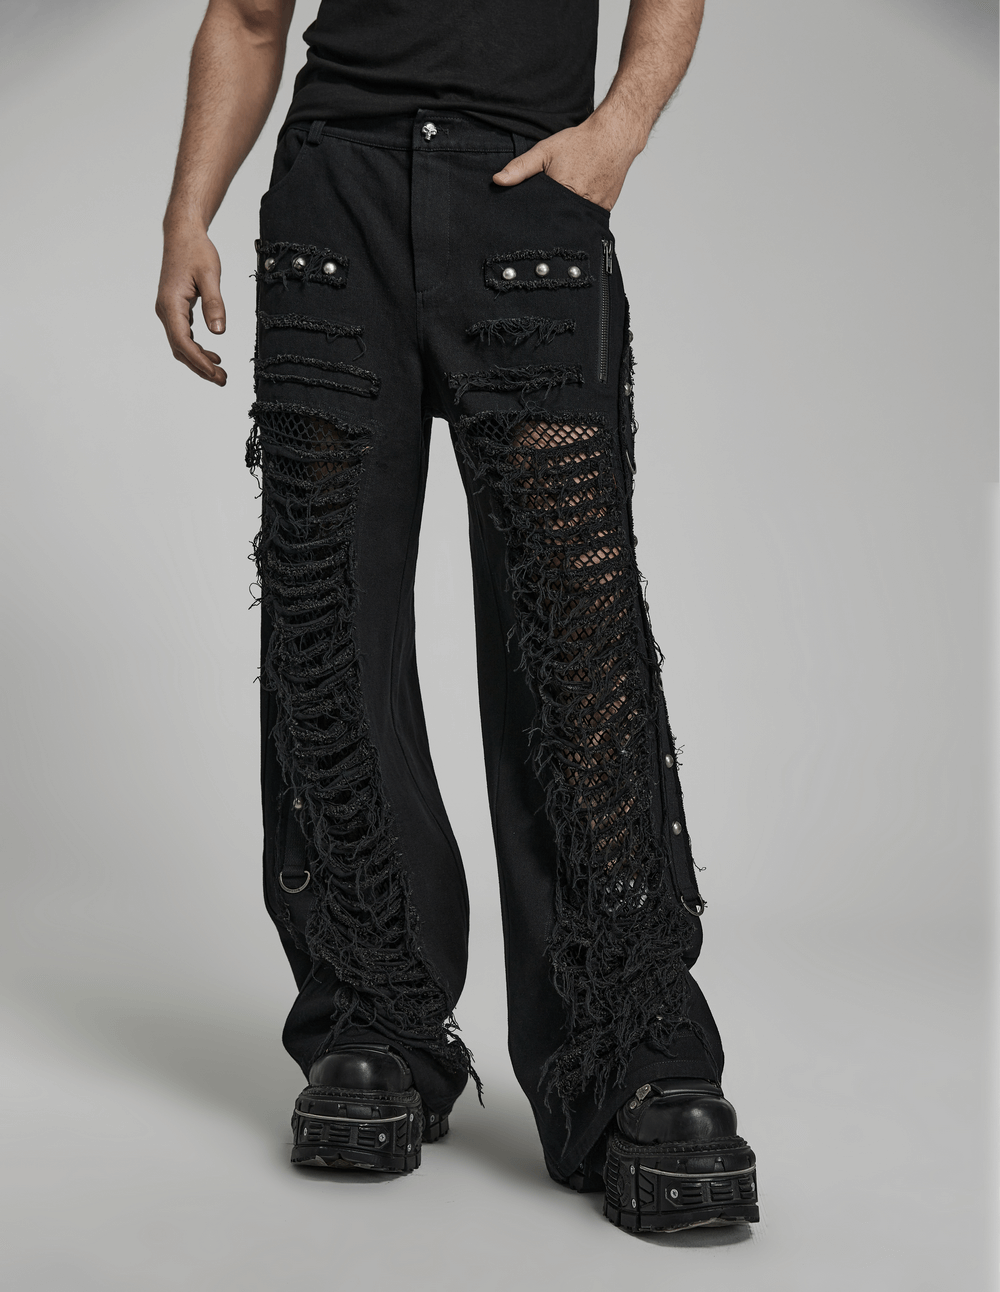 Black Gothic Lace-Up Chain Cargo Pants for Men - HARD'N'HEAVY